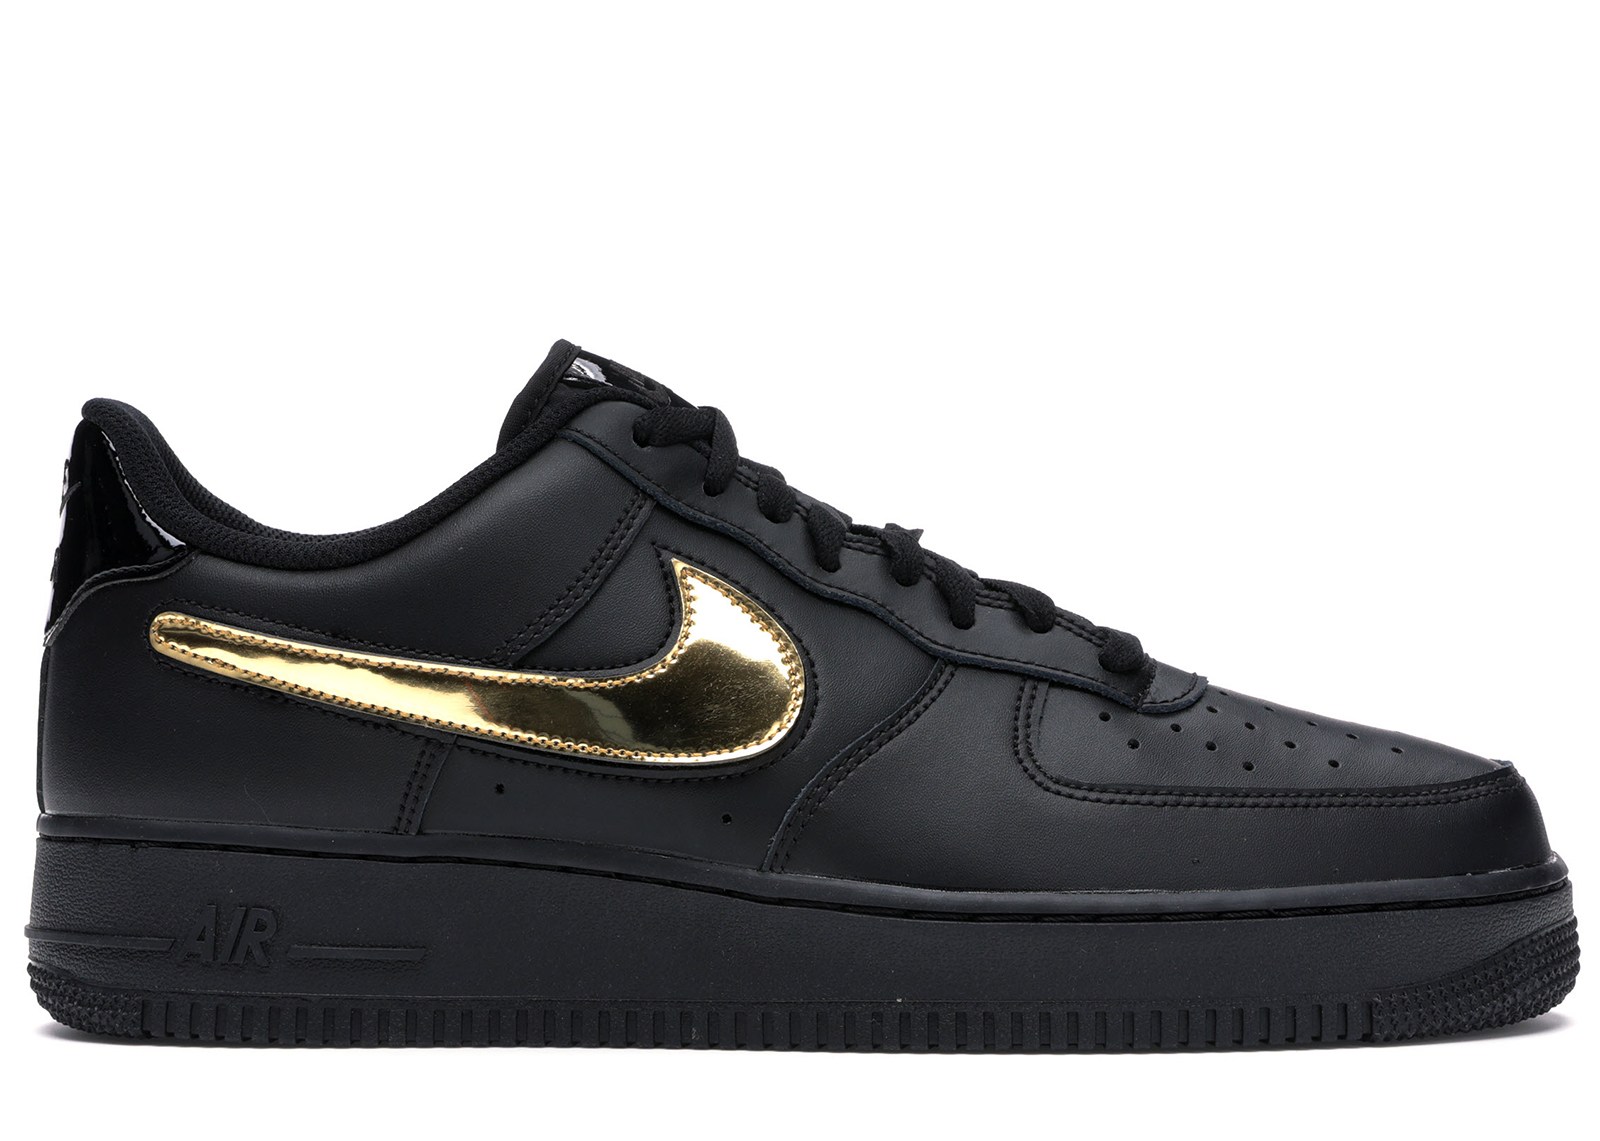 Nike Air Force 1 Black Metallic Gold Removable Swoosh Pack - CT2252-001